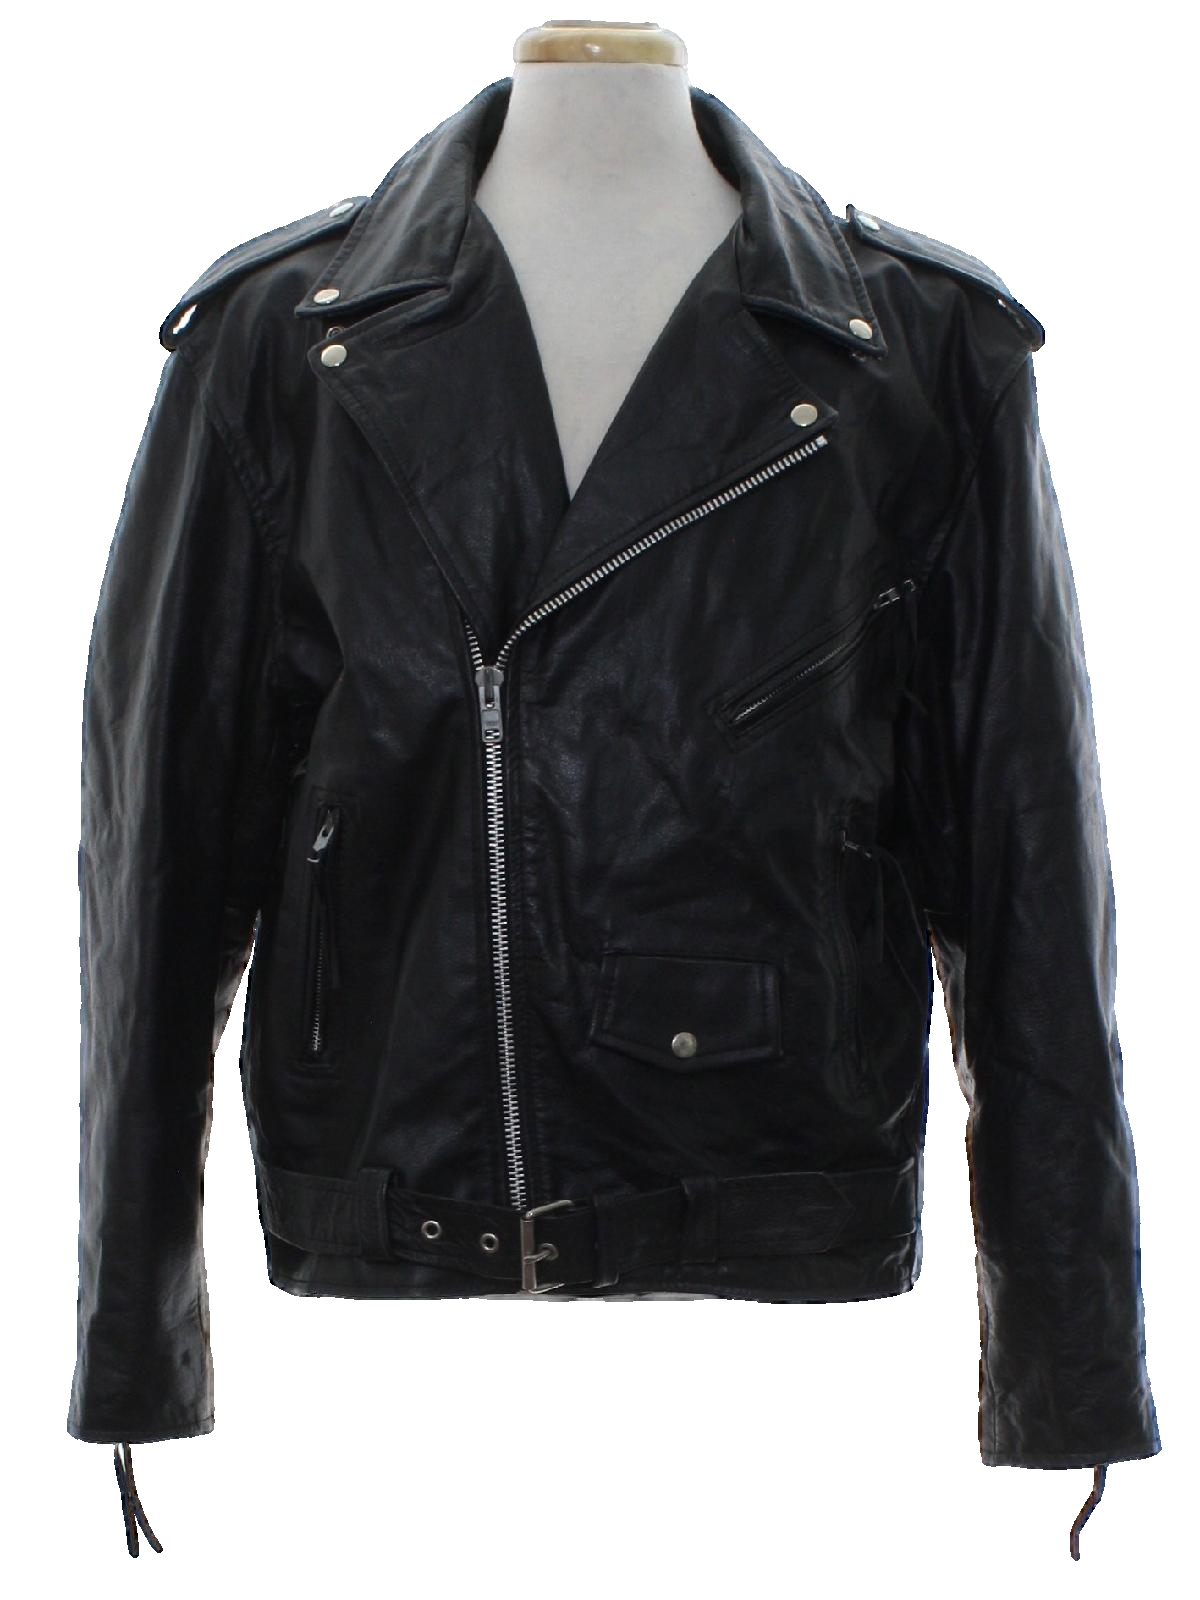 90's Leather Gallery Leather Jacket: 90s or Newer - Leather Gallery ...